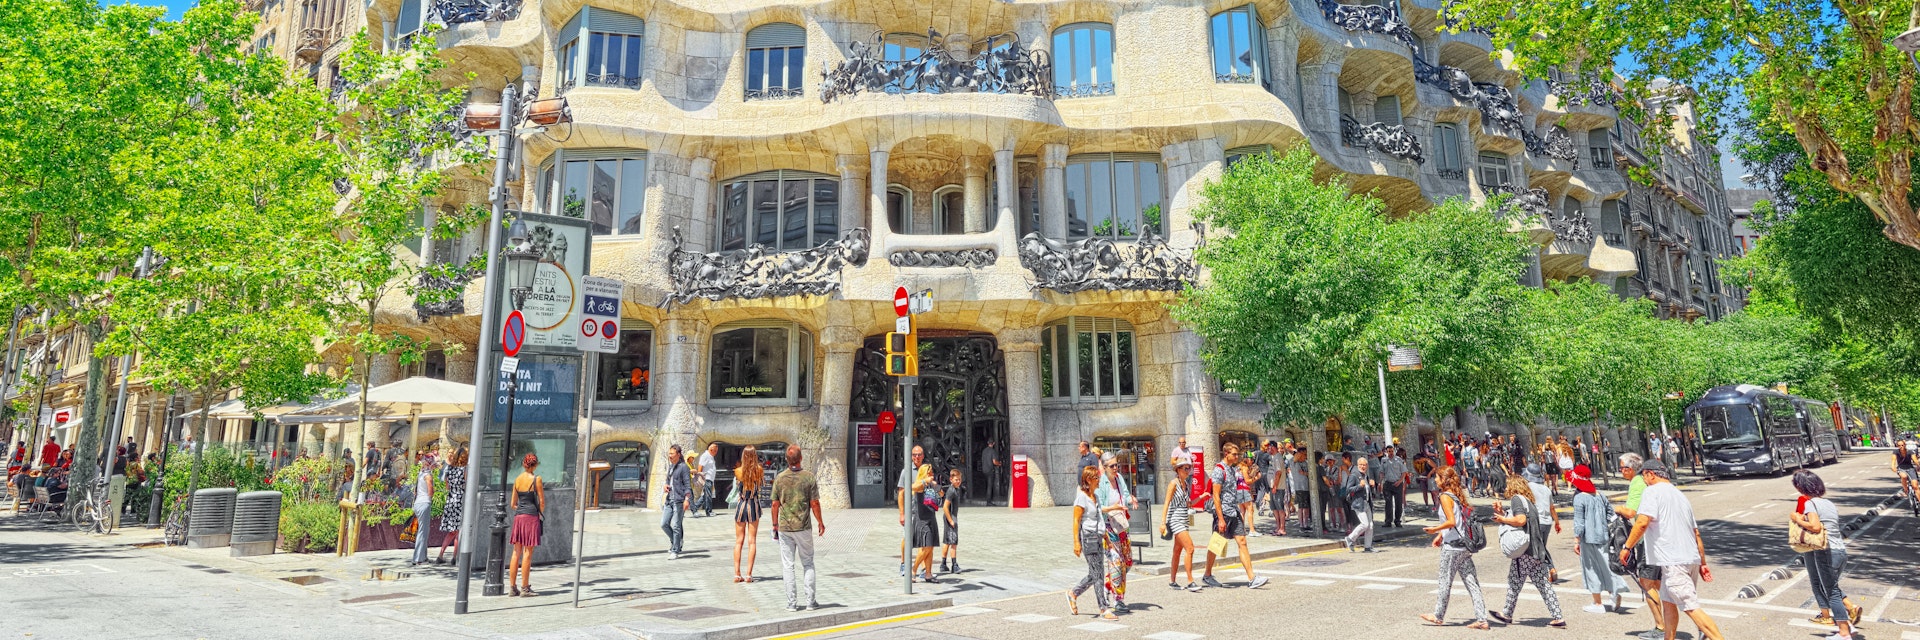 Barcelona, Spain - June 12, 2017 : Casa Mila  popularly known as La Pedrera or open quarry, a reference to its unconventional rough-hewn appearance, i